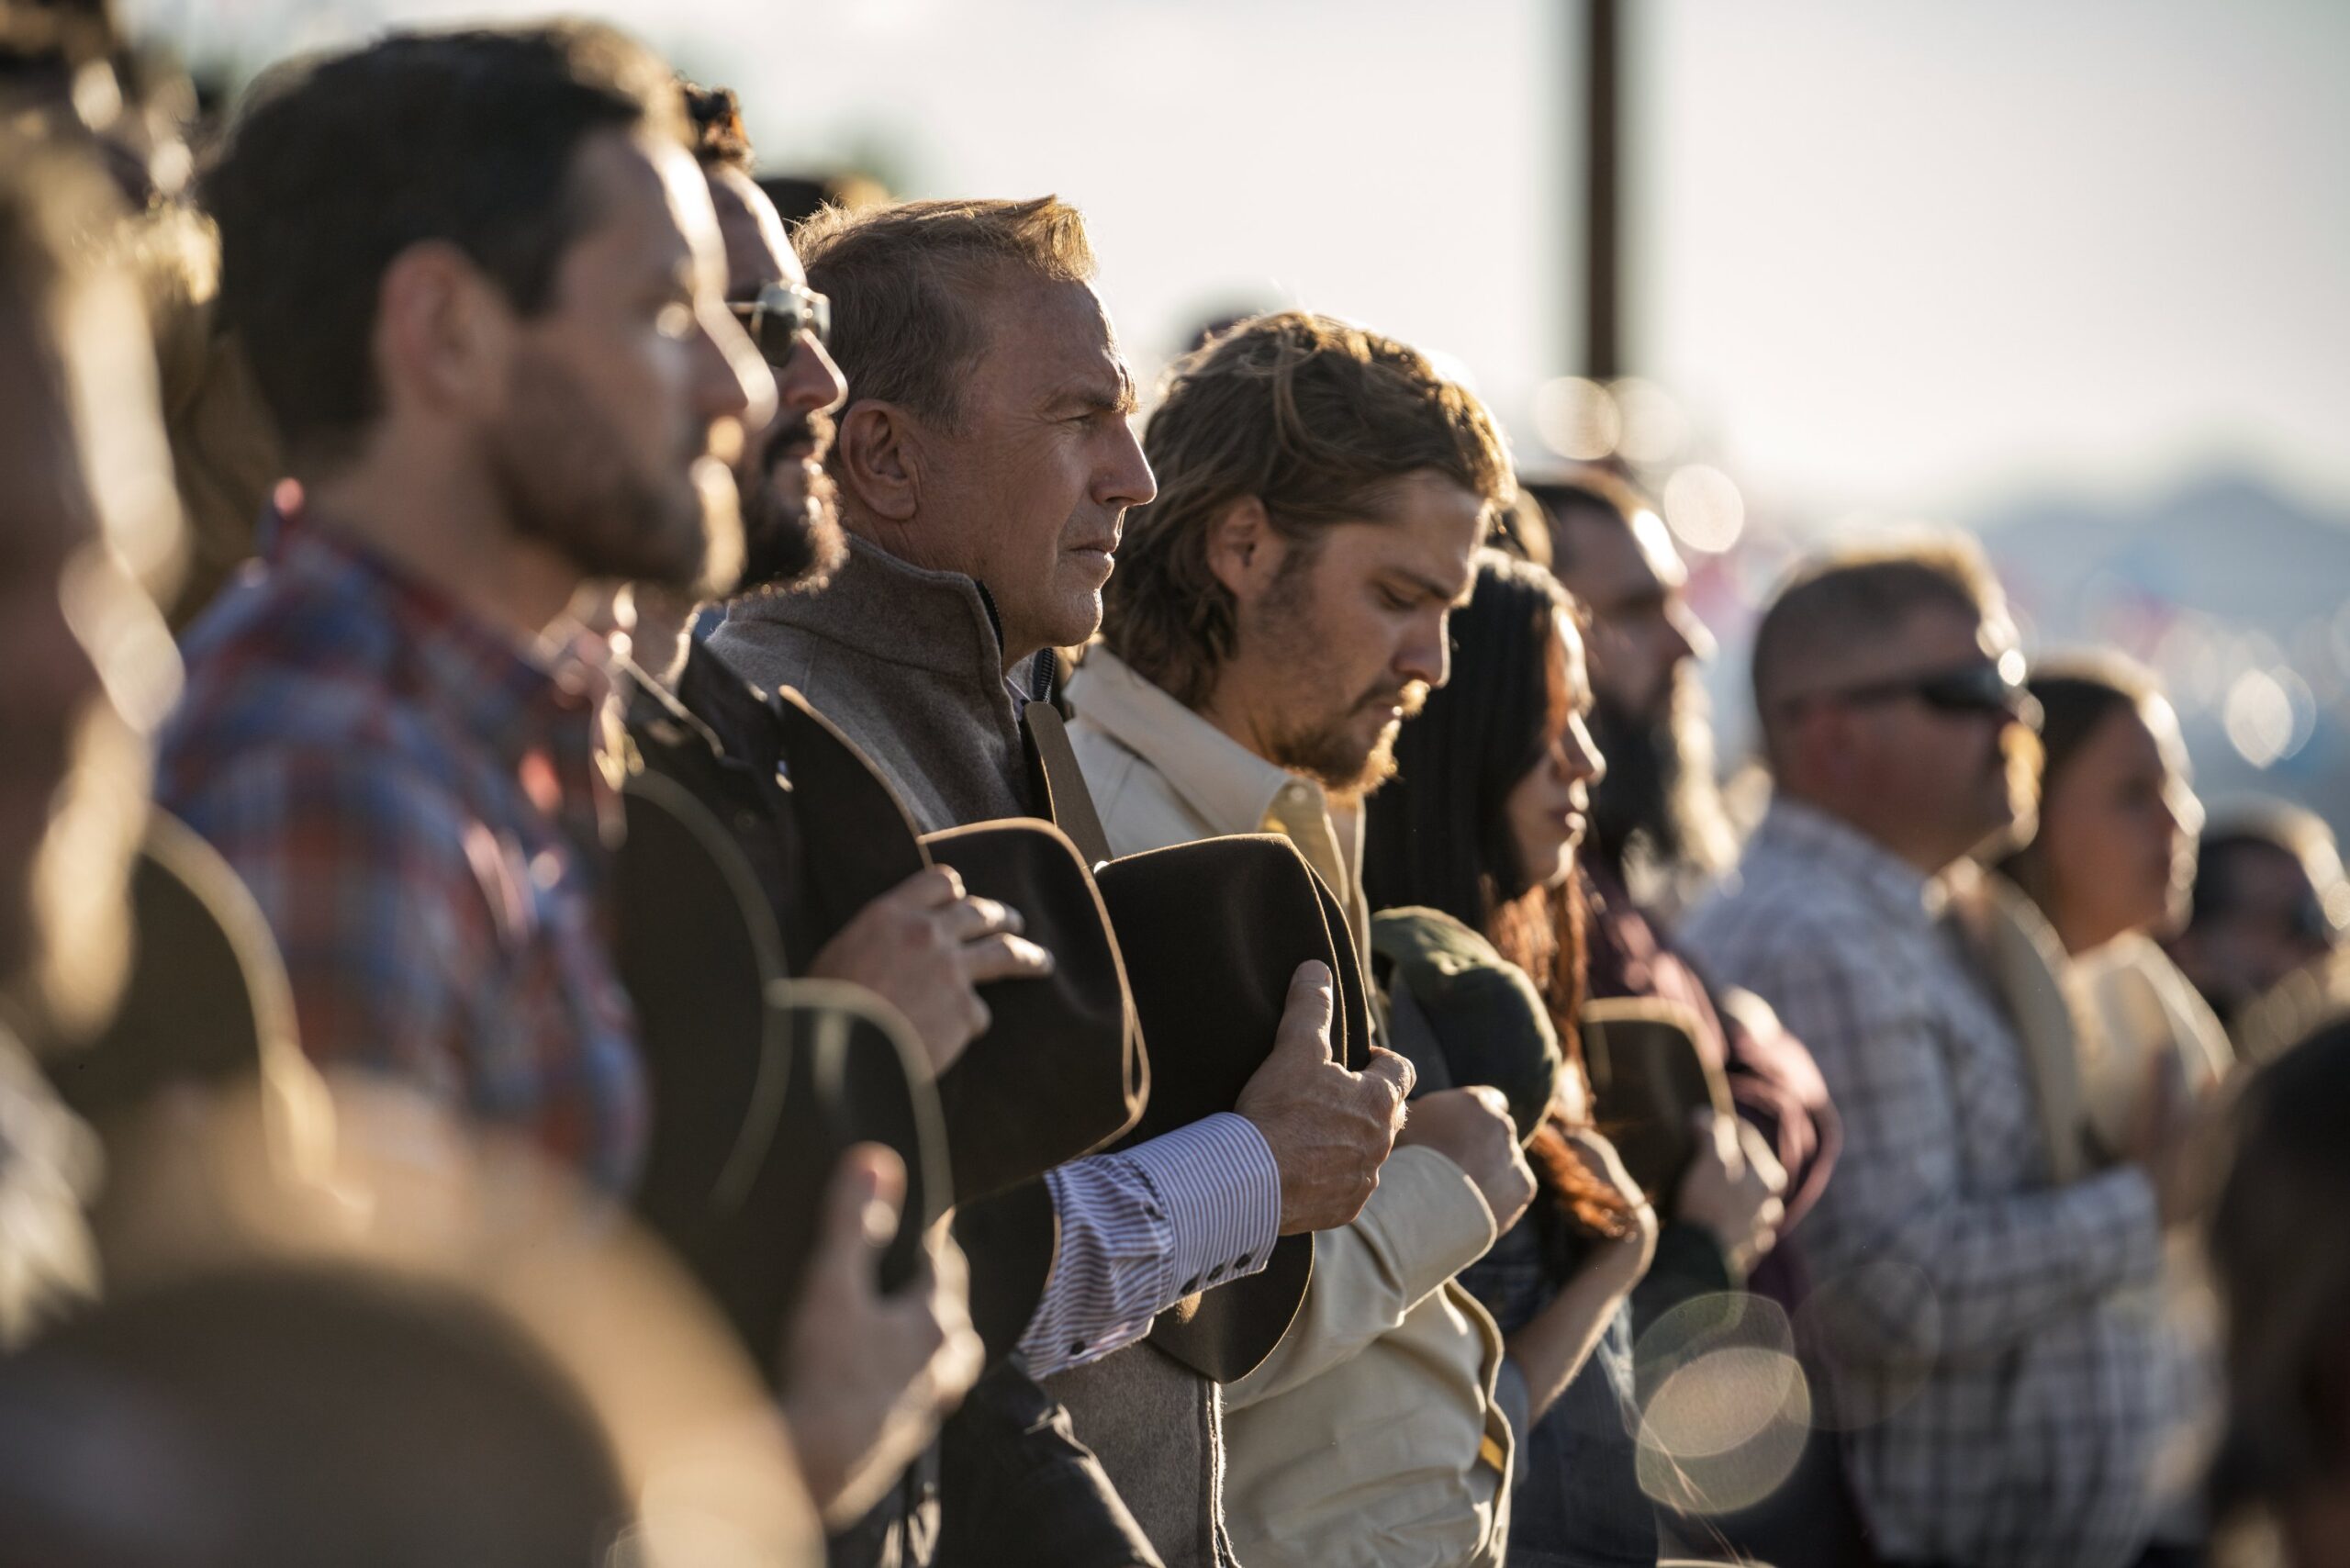 (L-R) Ian Bohen as Ryan, Cole Hauser as Rip Wheeler and Kevin Costner as John Dutton and Luke Grimes as Kayce Dutton. Episode 3 of Yellowstone